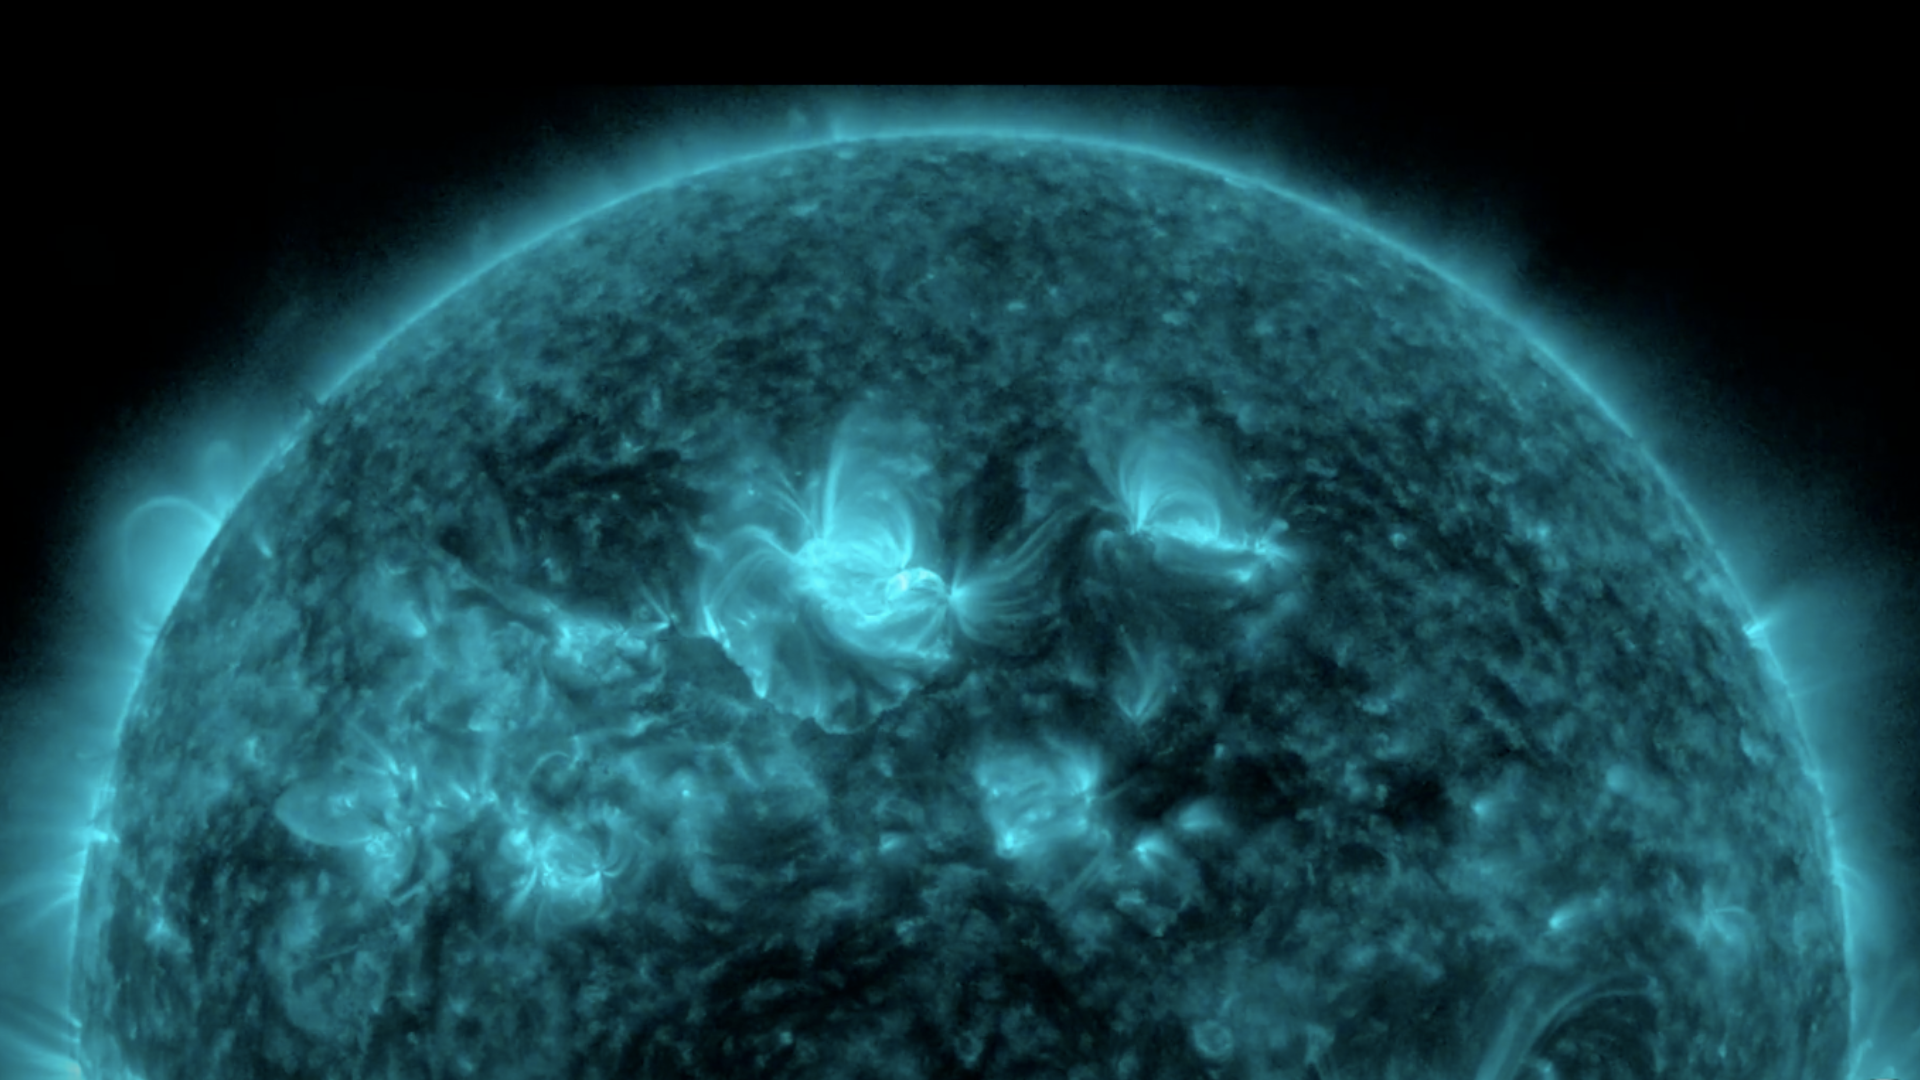 Earth comes in firing line of 2 powerful solar flares from Sun [Video]